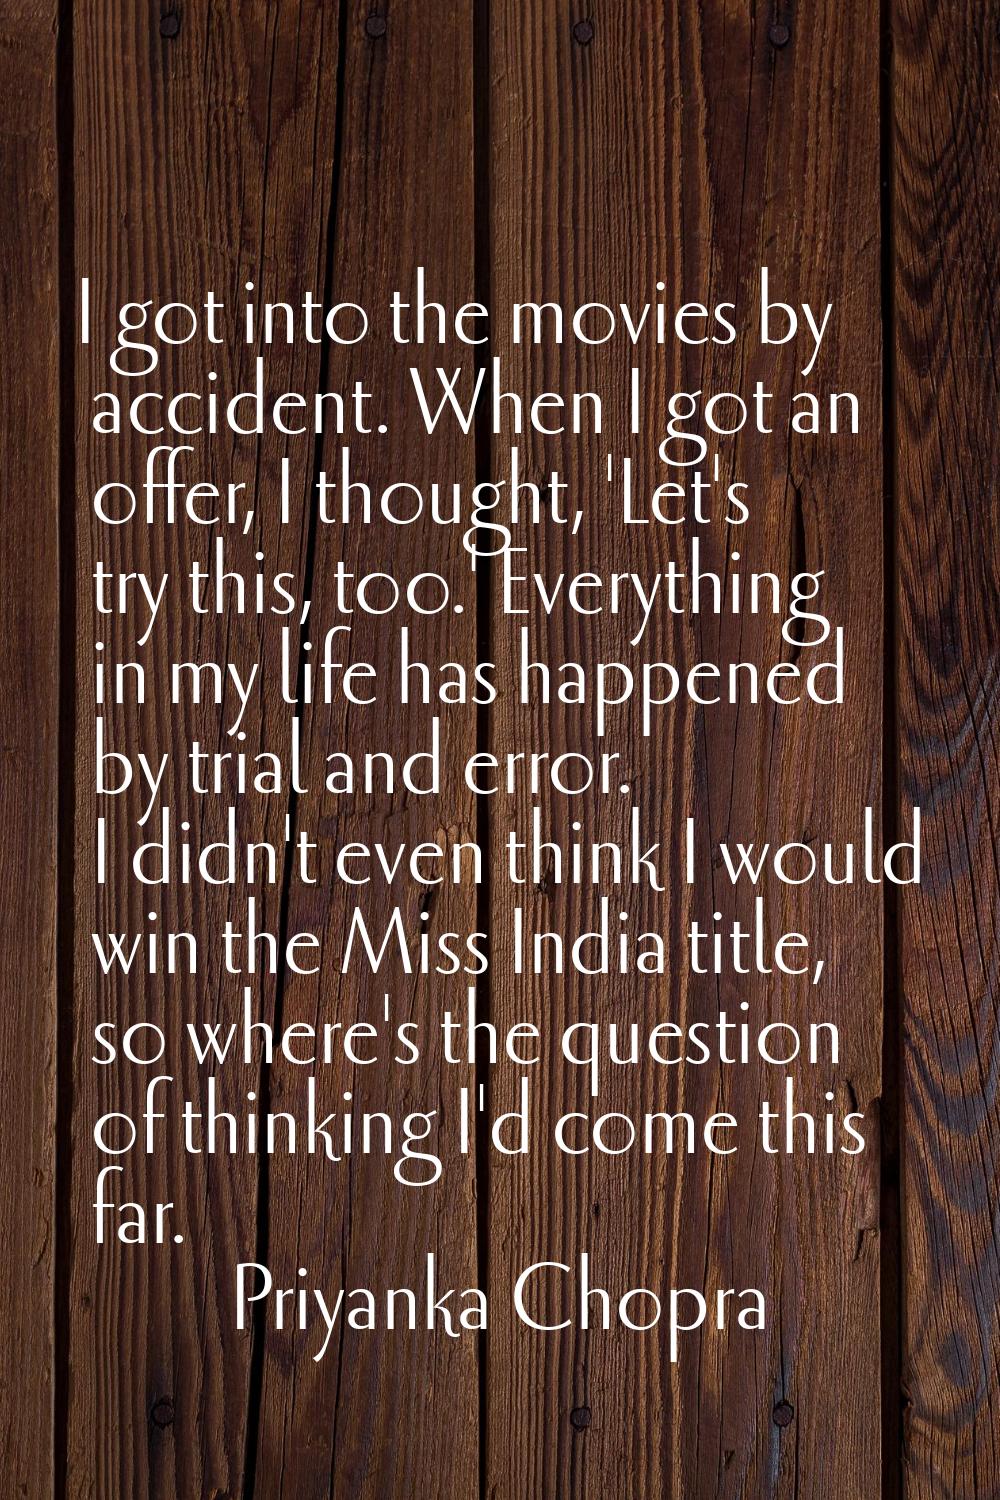 I got into the movies by accident. When I got an offer, I thought, 'Let's try this, too.' Everythin